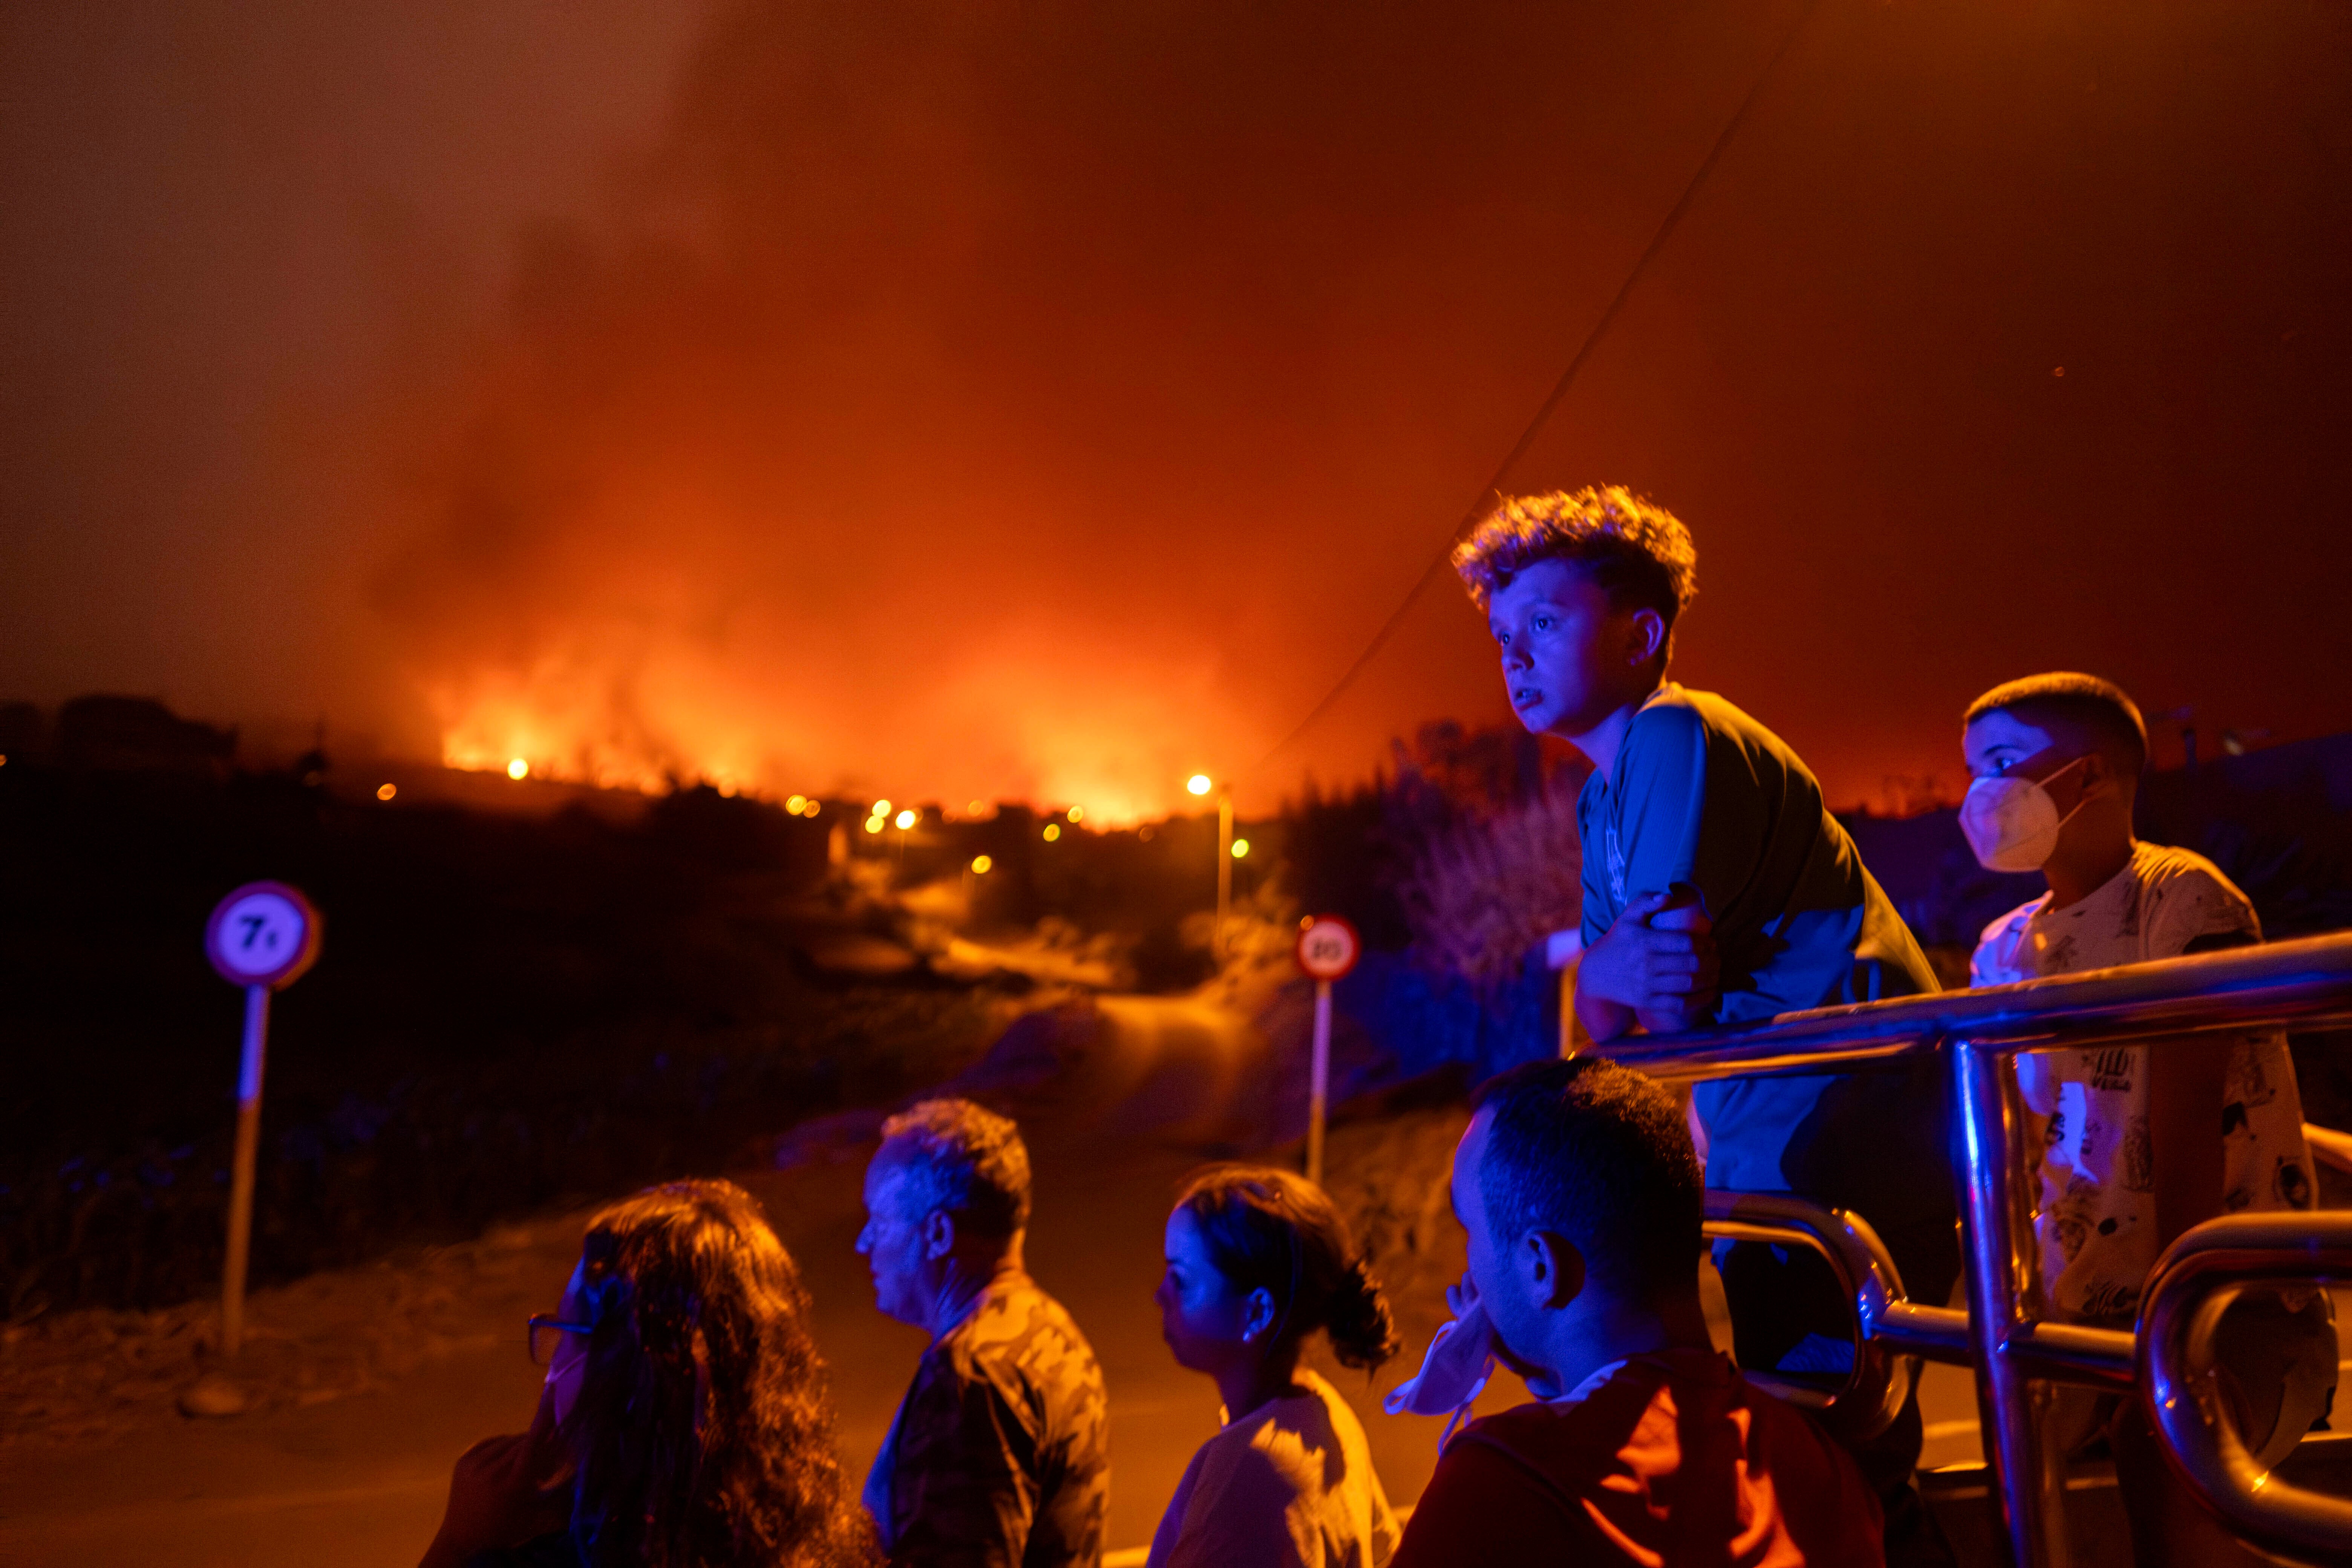 Local residents try to reach their houses in Benijos village as police block the area as fire advances in La Orotava